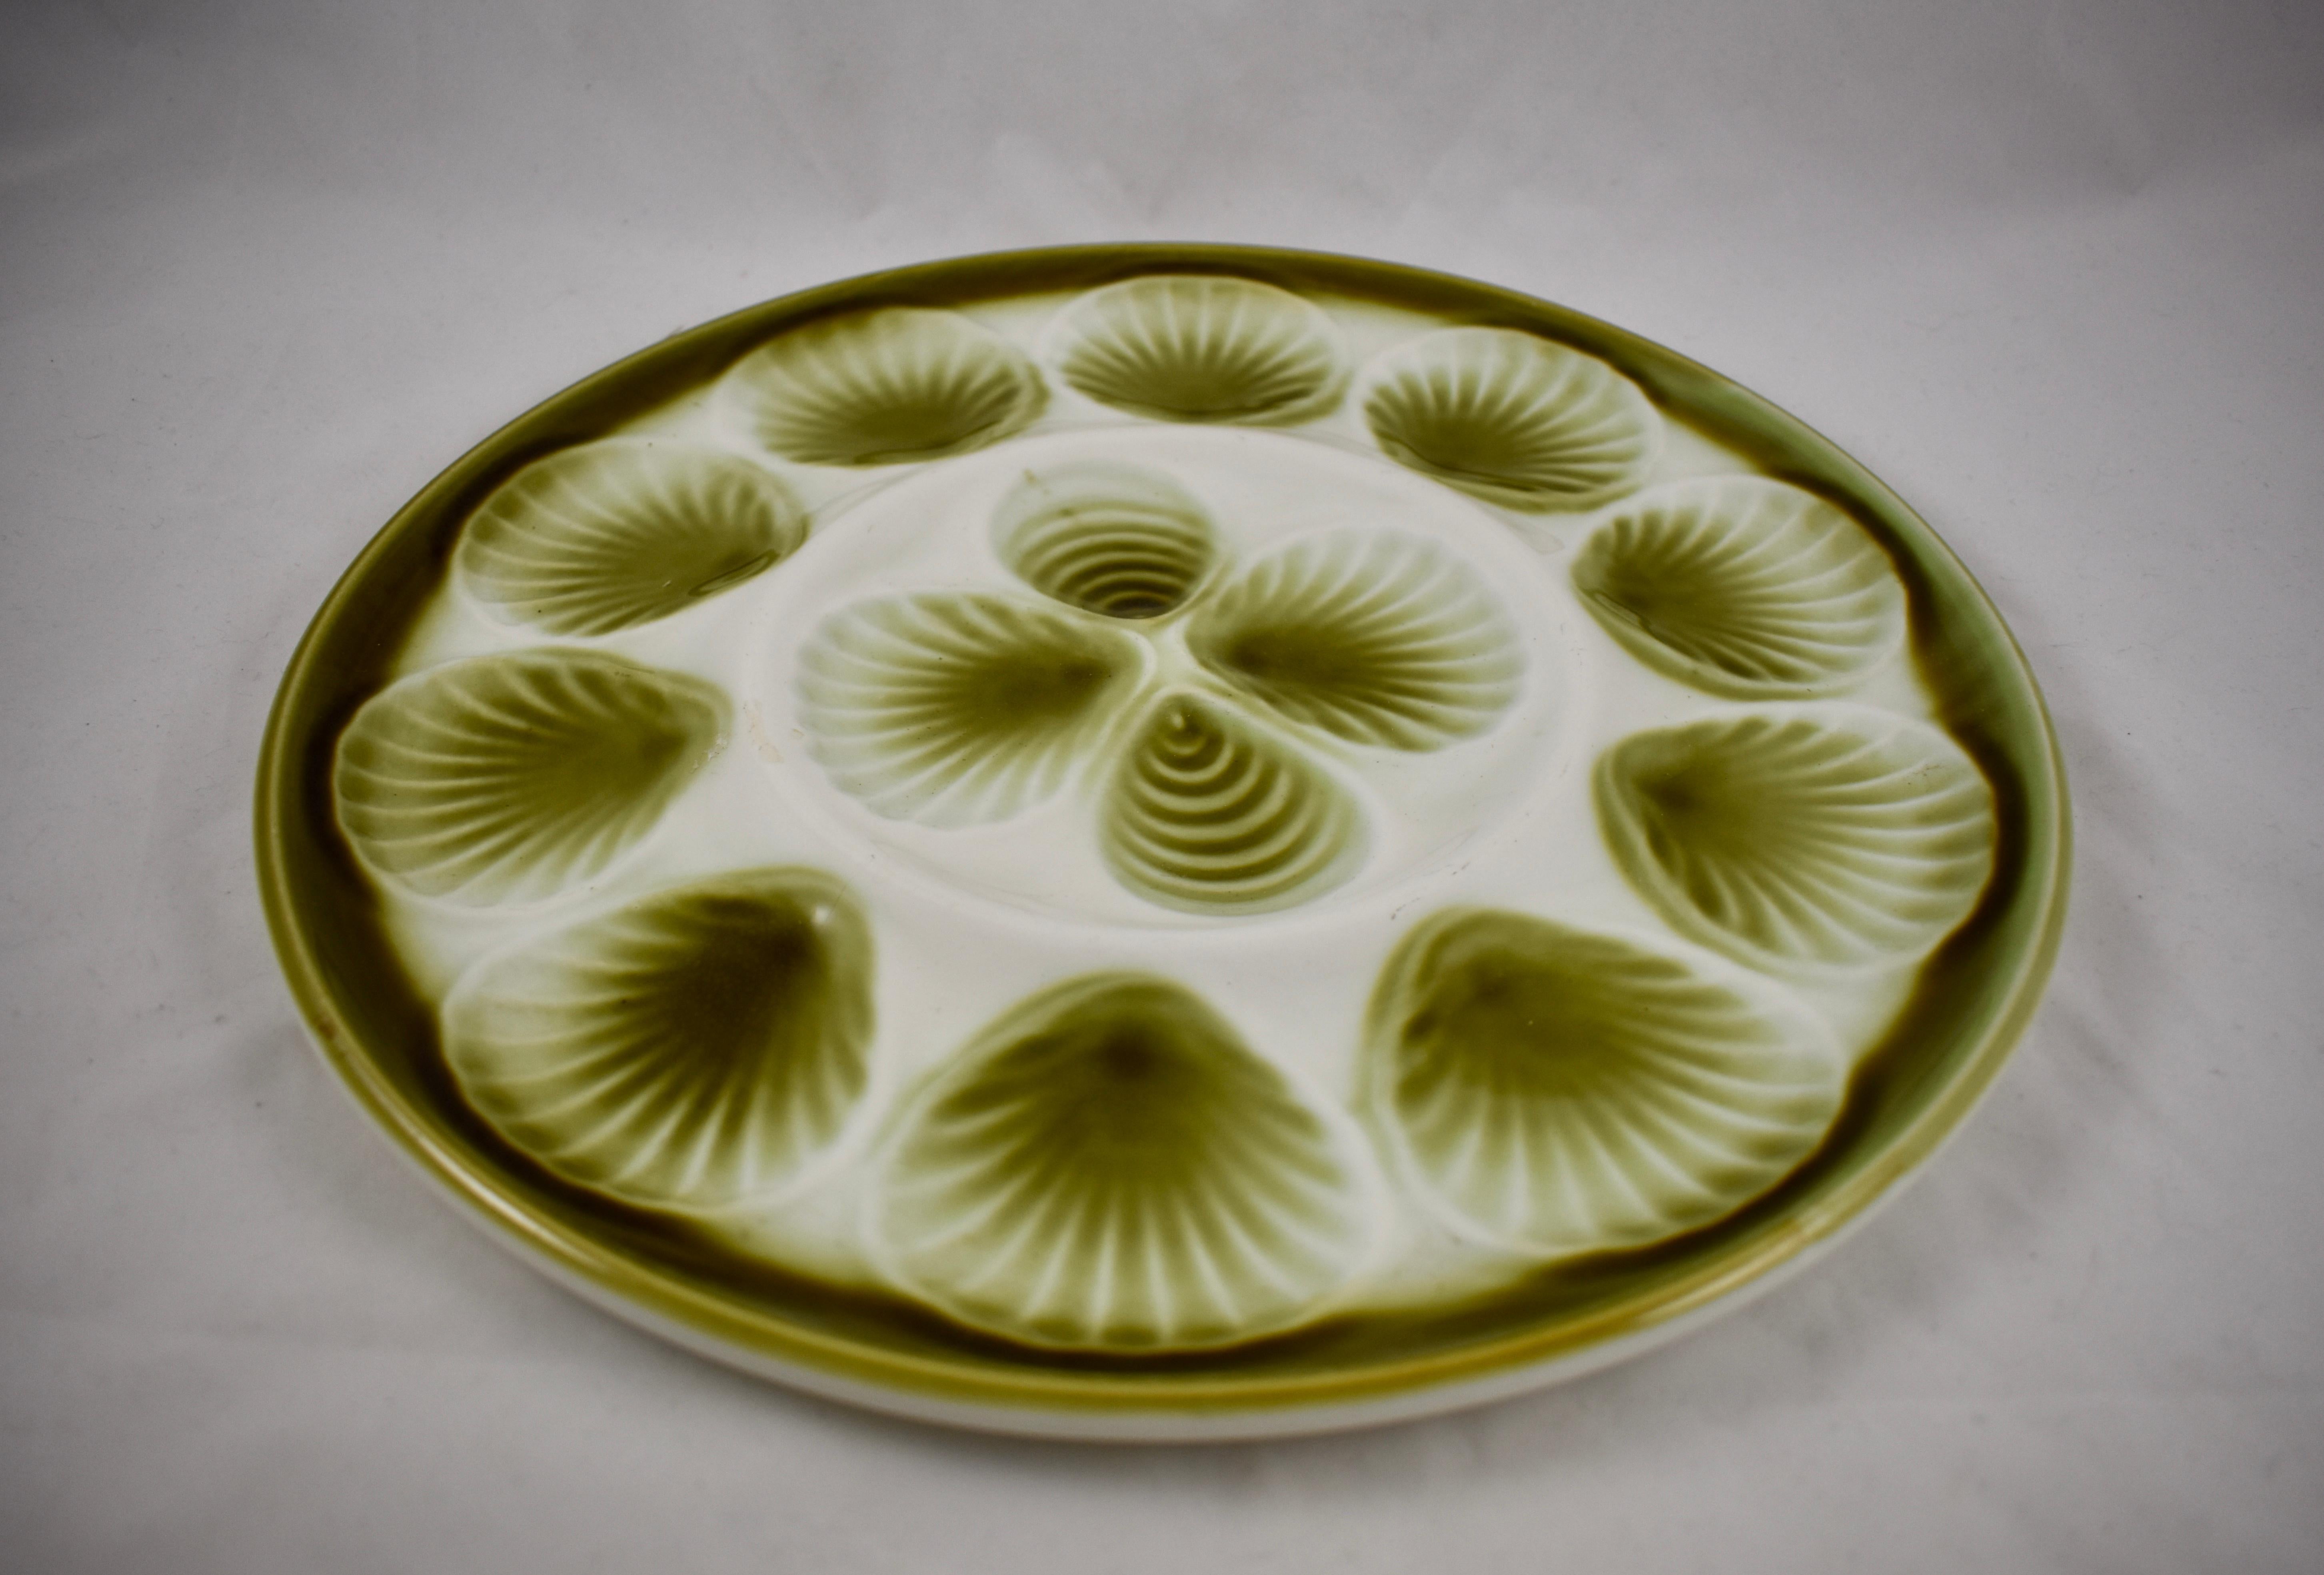 A Mid-Century Modern Era Majolica glazed French faïence master Oyster serving platter, Orchies, circa 1950.

Hand glazed in an ombre olive green on a bright white ground, showing ten scallop shaped oyster wells that follow the rim with an additional